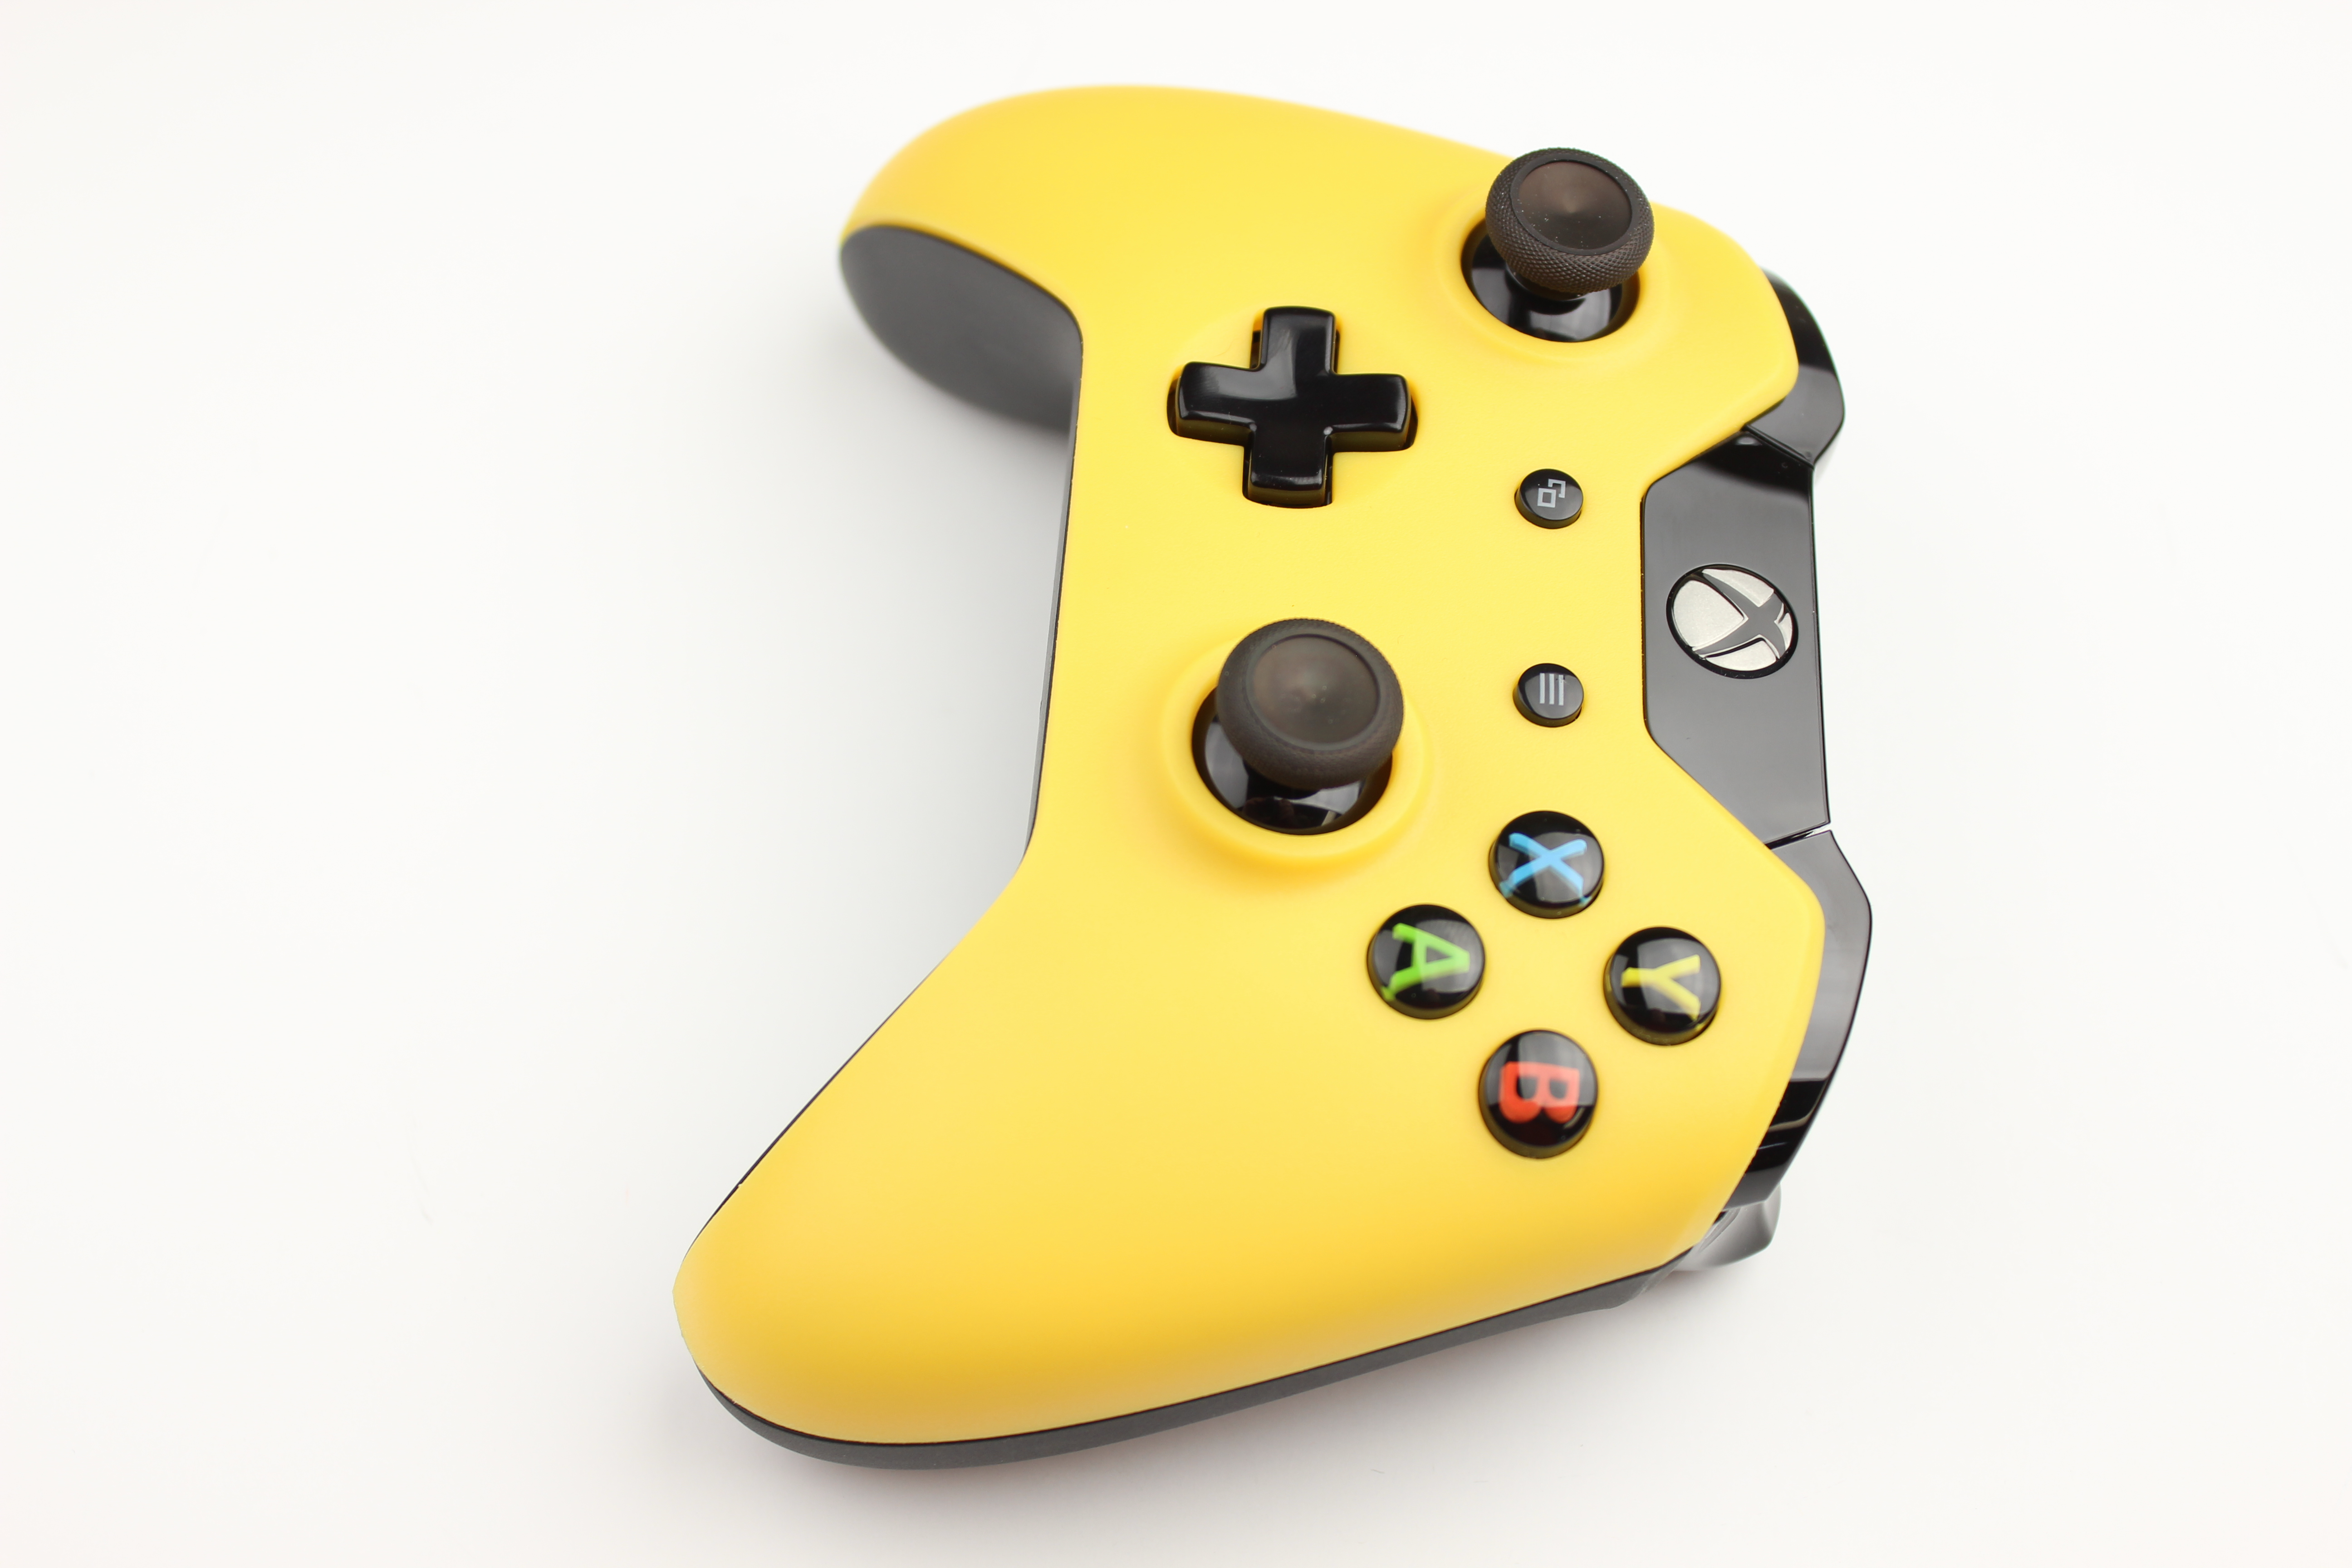 yellow xbox one controller